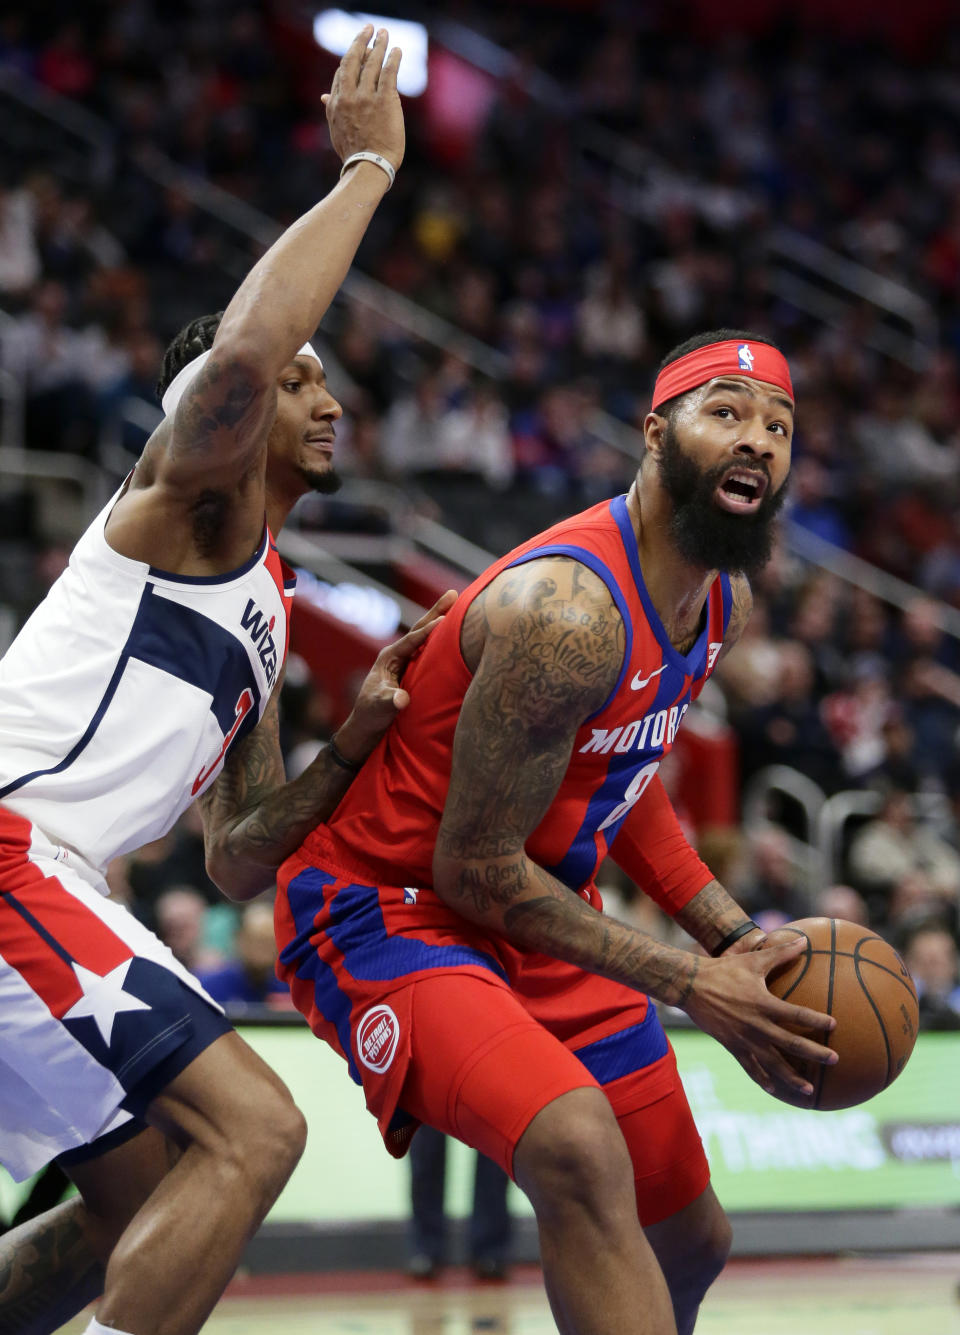 Detroit Pistons forward Markieff Morris (8) goes to the basket against Washington Wizards guard Bradley Beal (3) during the first half of an NBA basketball game Thursday, Dec. 26, 2019, in Detroit. (AP Photo/Duane Burleson)